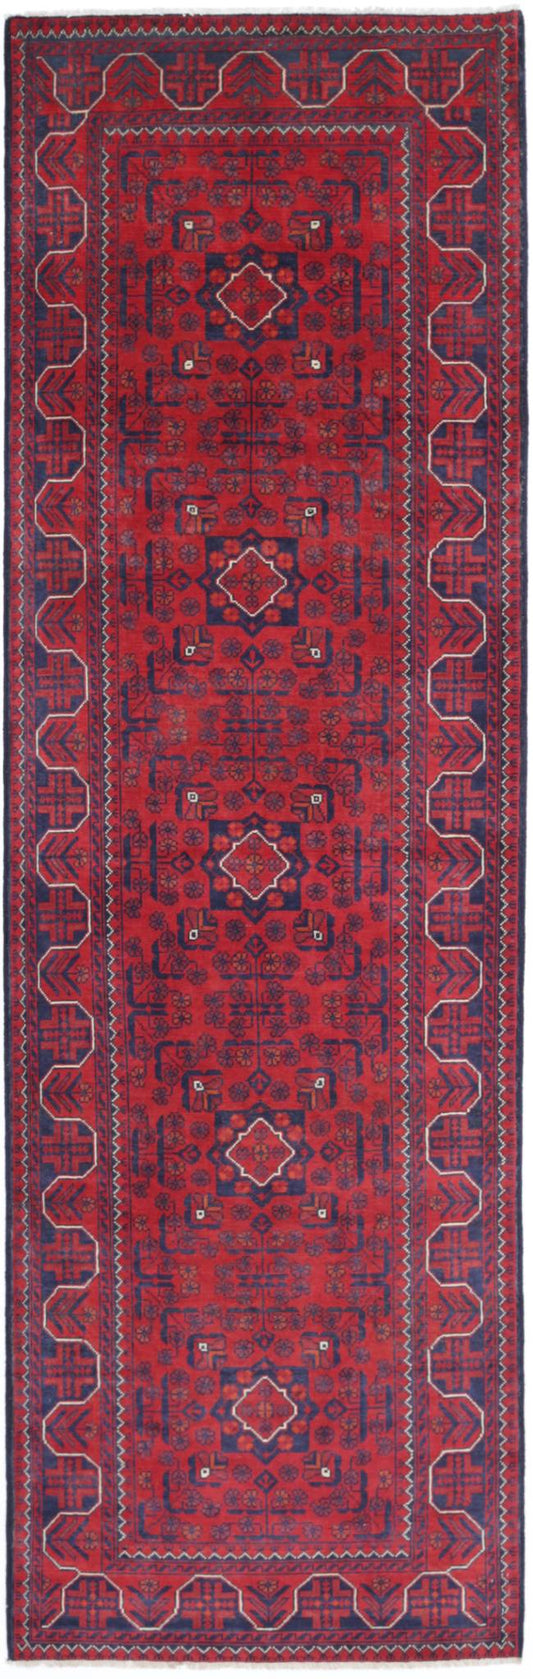 Tribal Hand Knotted Afghan Khamyab Wool Rug of Size 2'8'' X 9'4'' in Red and Red Colors - Made in Afghanistan